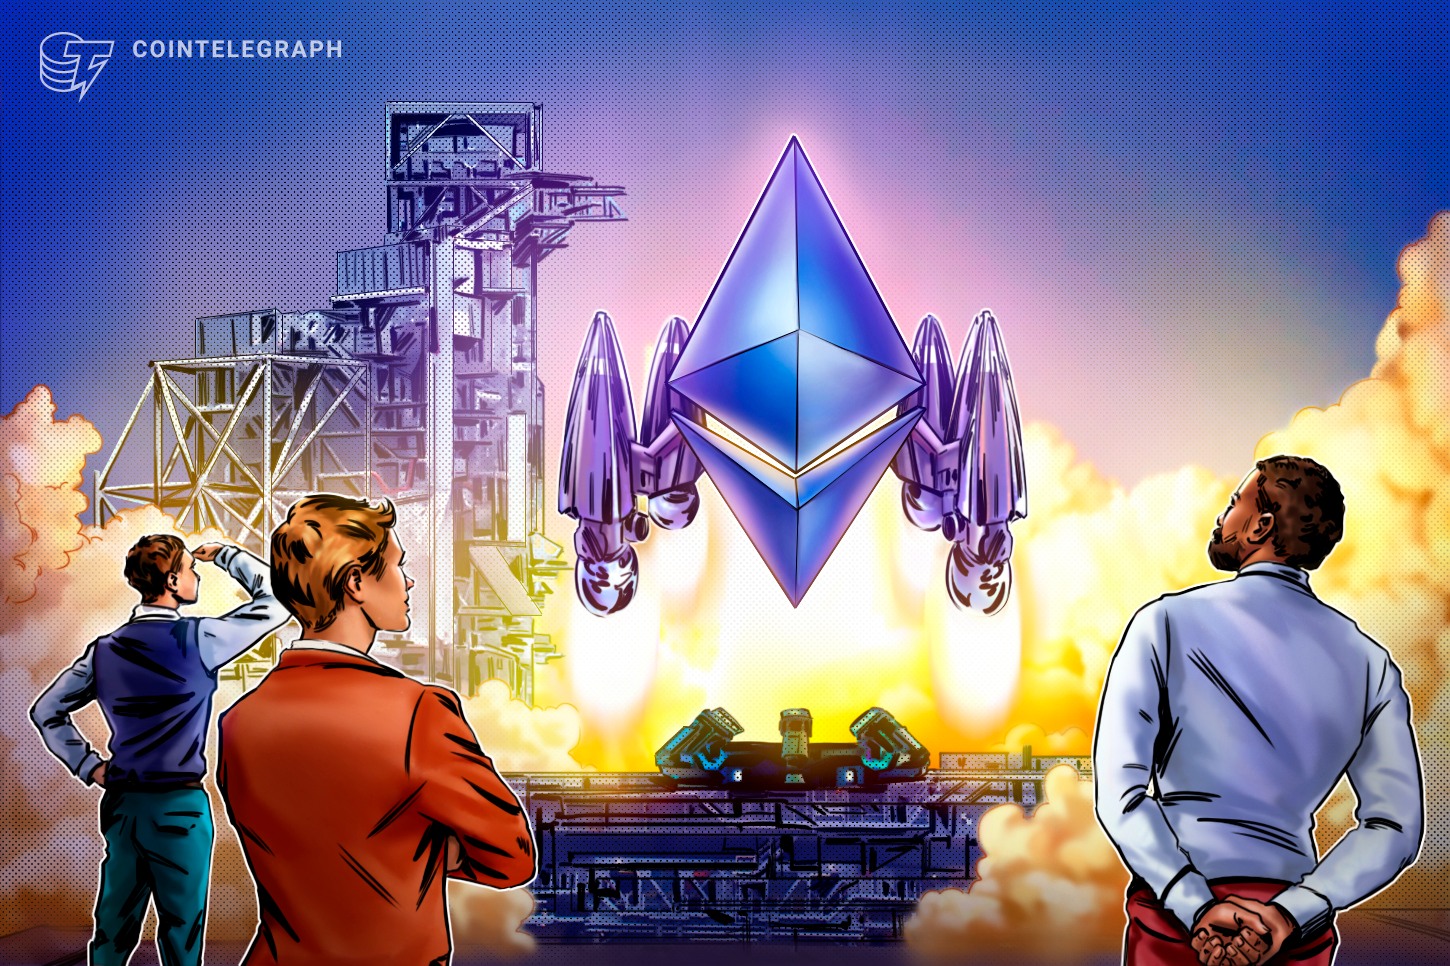 Will-the-ethereum-merge-crash-or-revive-the-crypto-market?-|-find-out-now-on-the-market-report